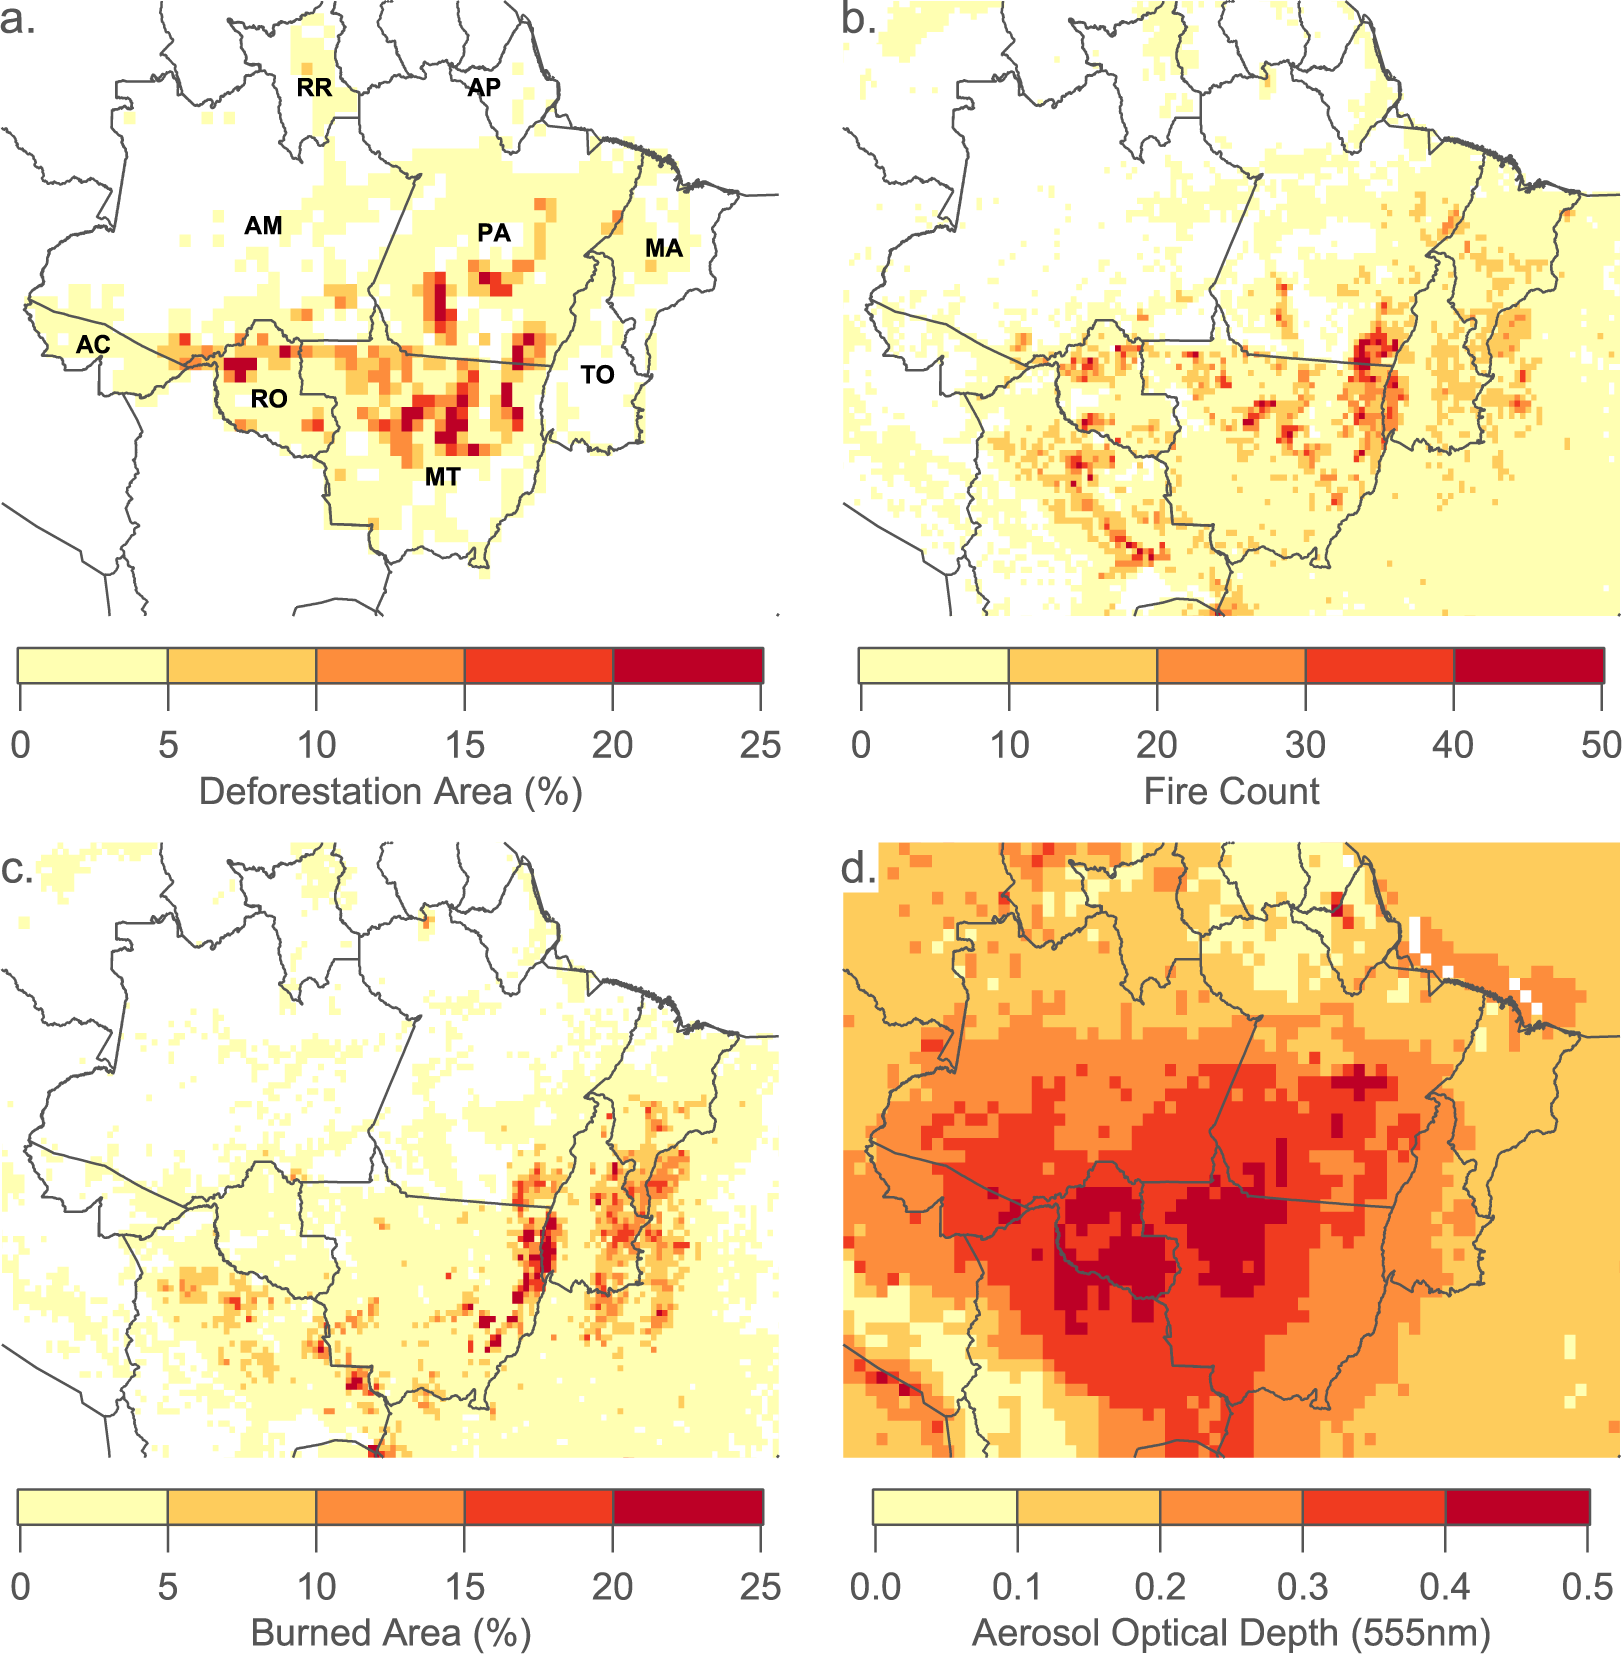 Non-deforestation drivers of fires are increasingly important sources of  aerosol and carbon dioxide emissions across Amazonia | Scientific Reports